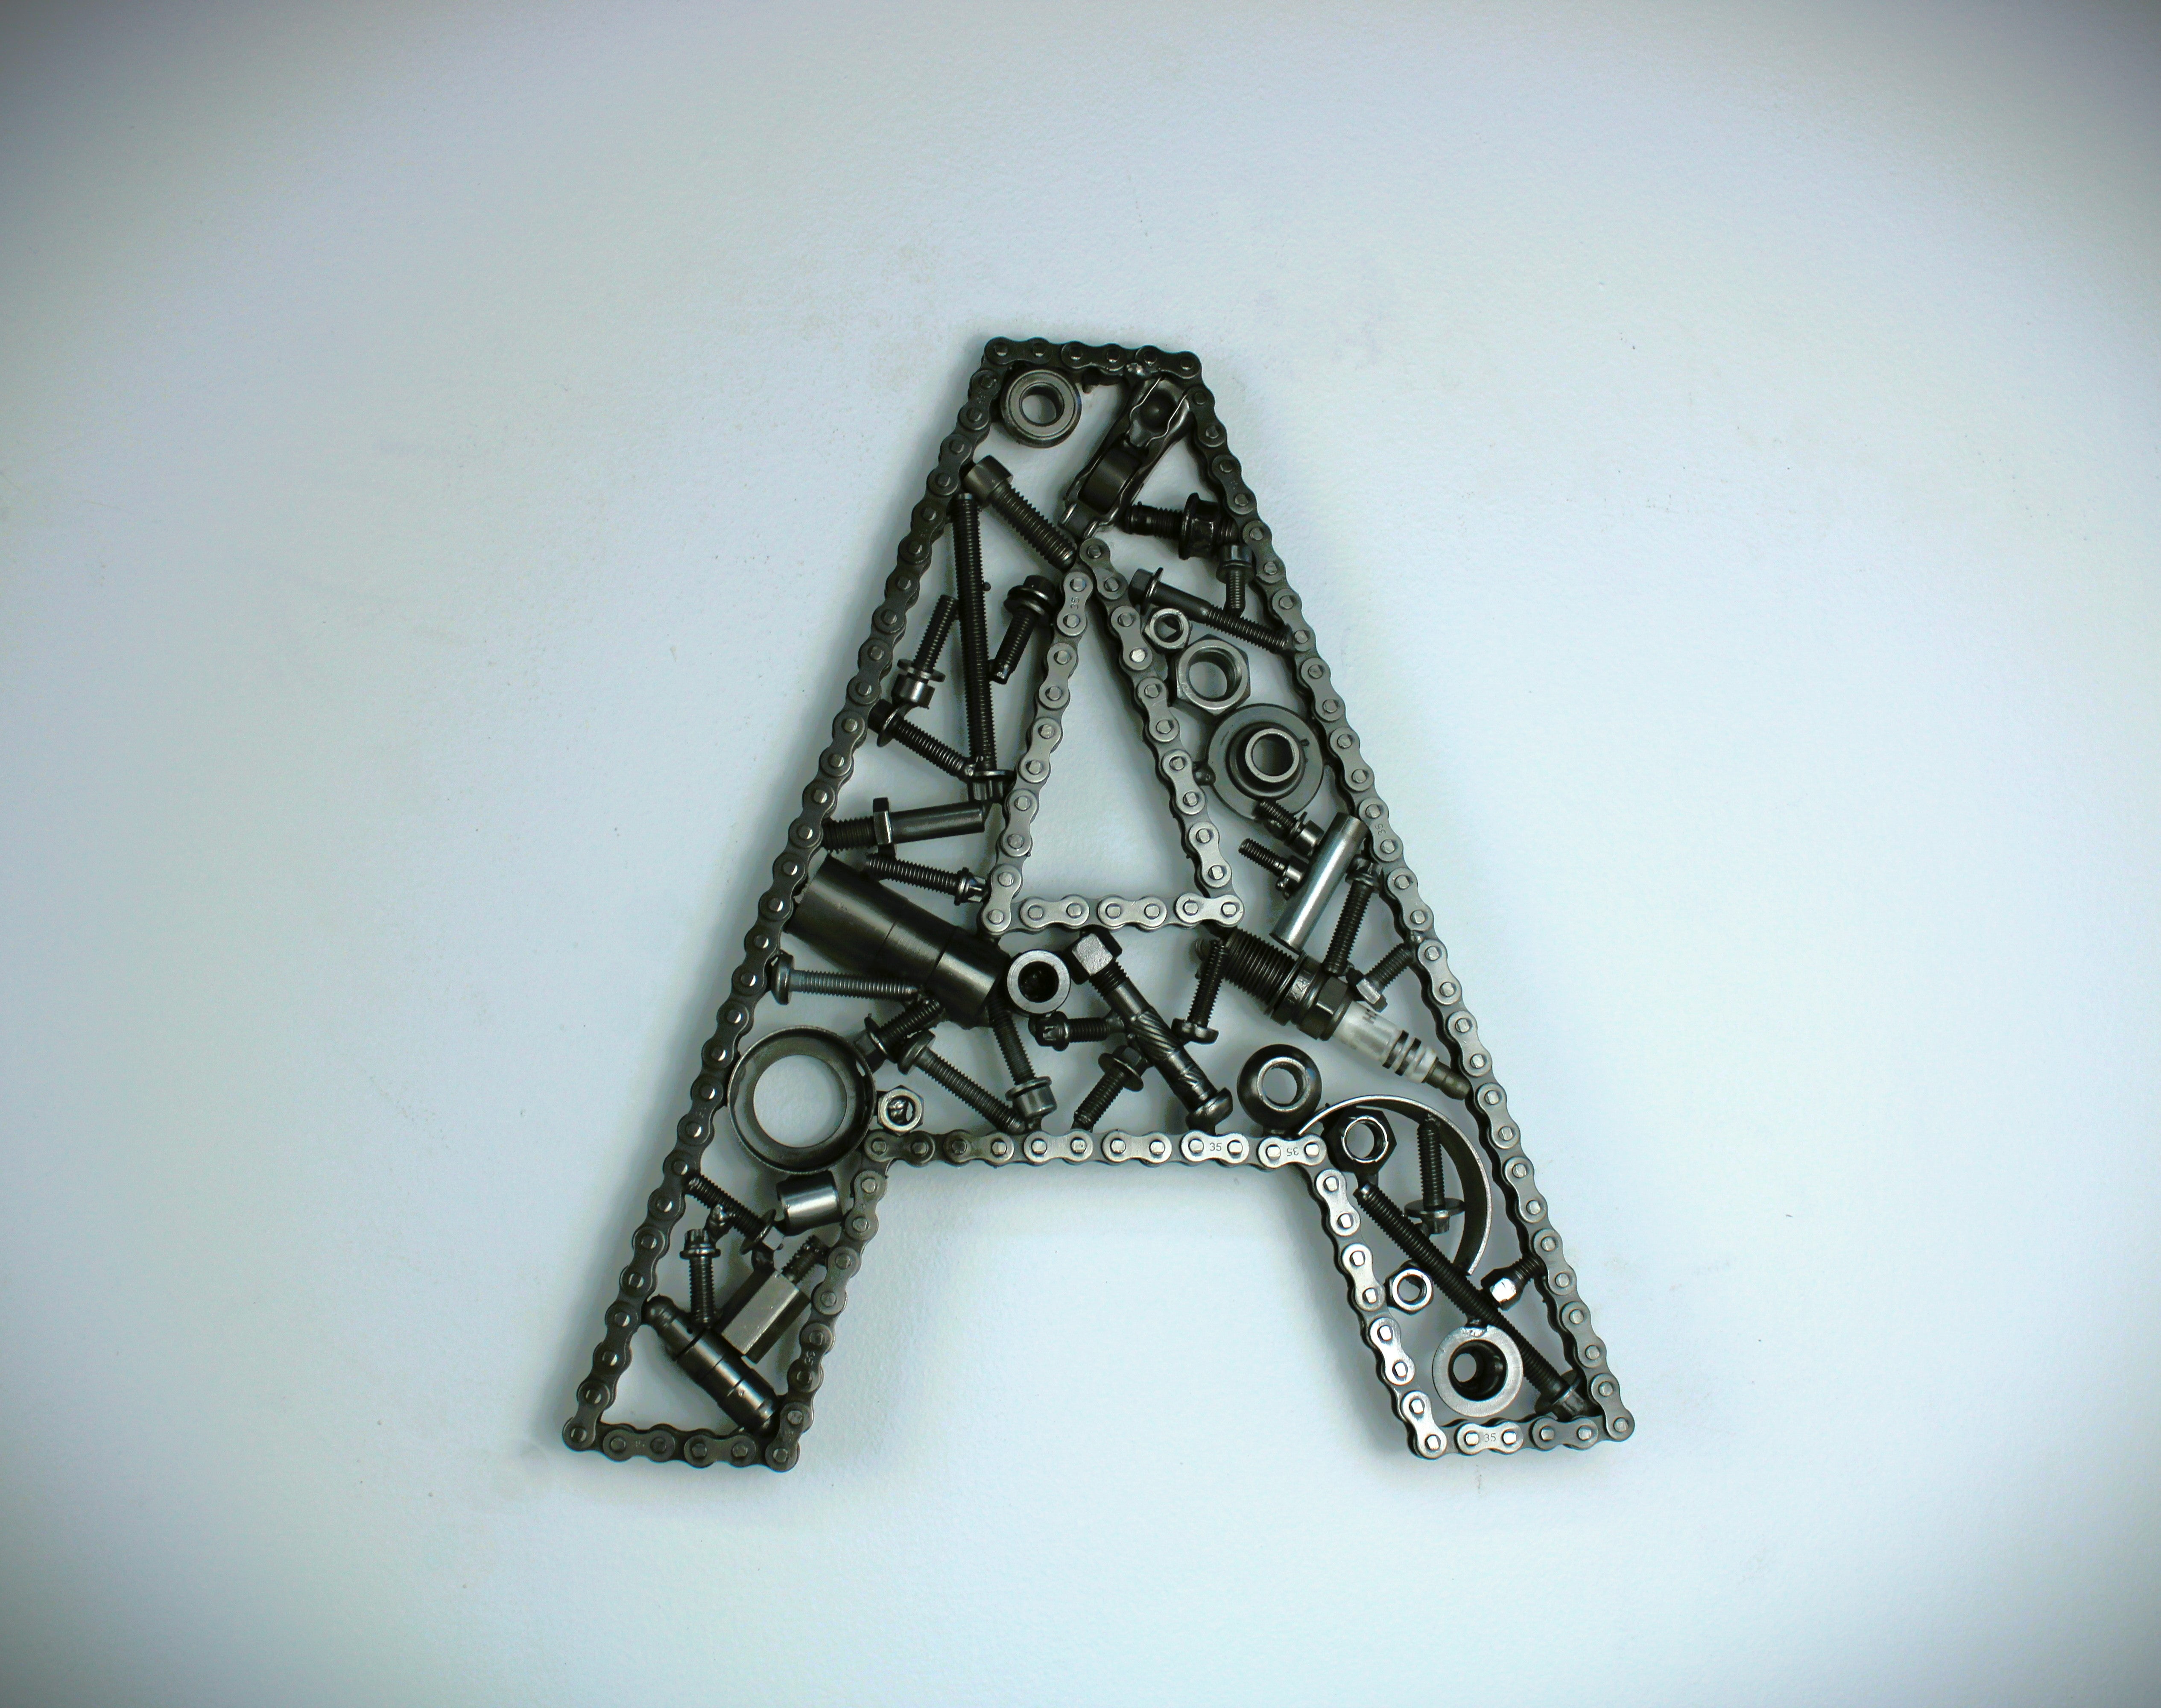 A letter A made out of real car parts, outlined with a timing chain.